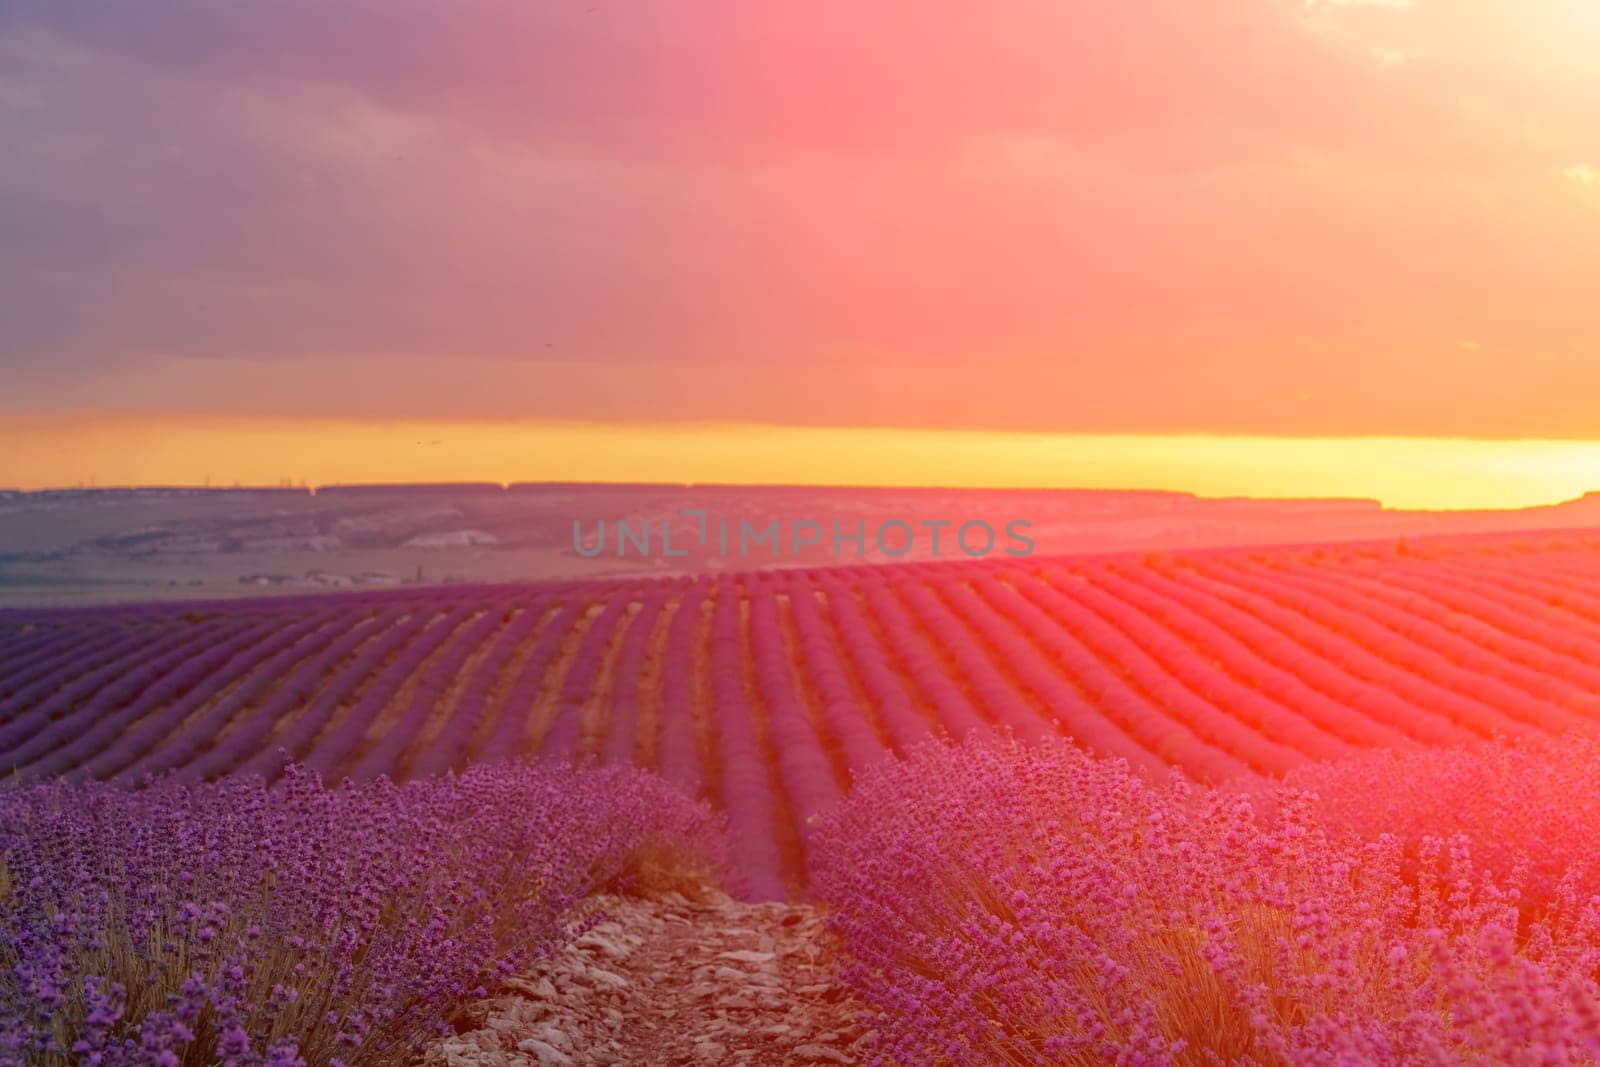 Sun is setting over a beautiful purple lavender filed